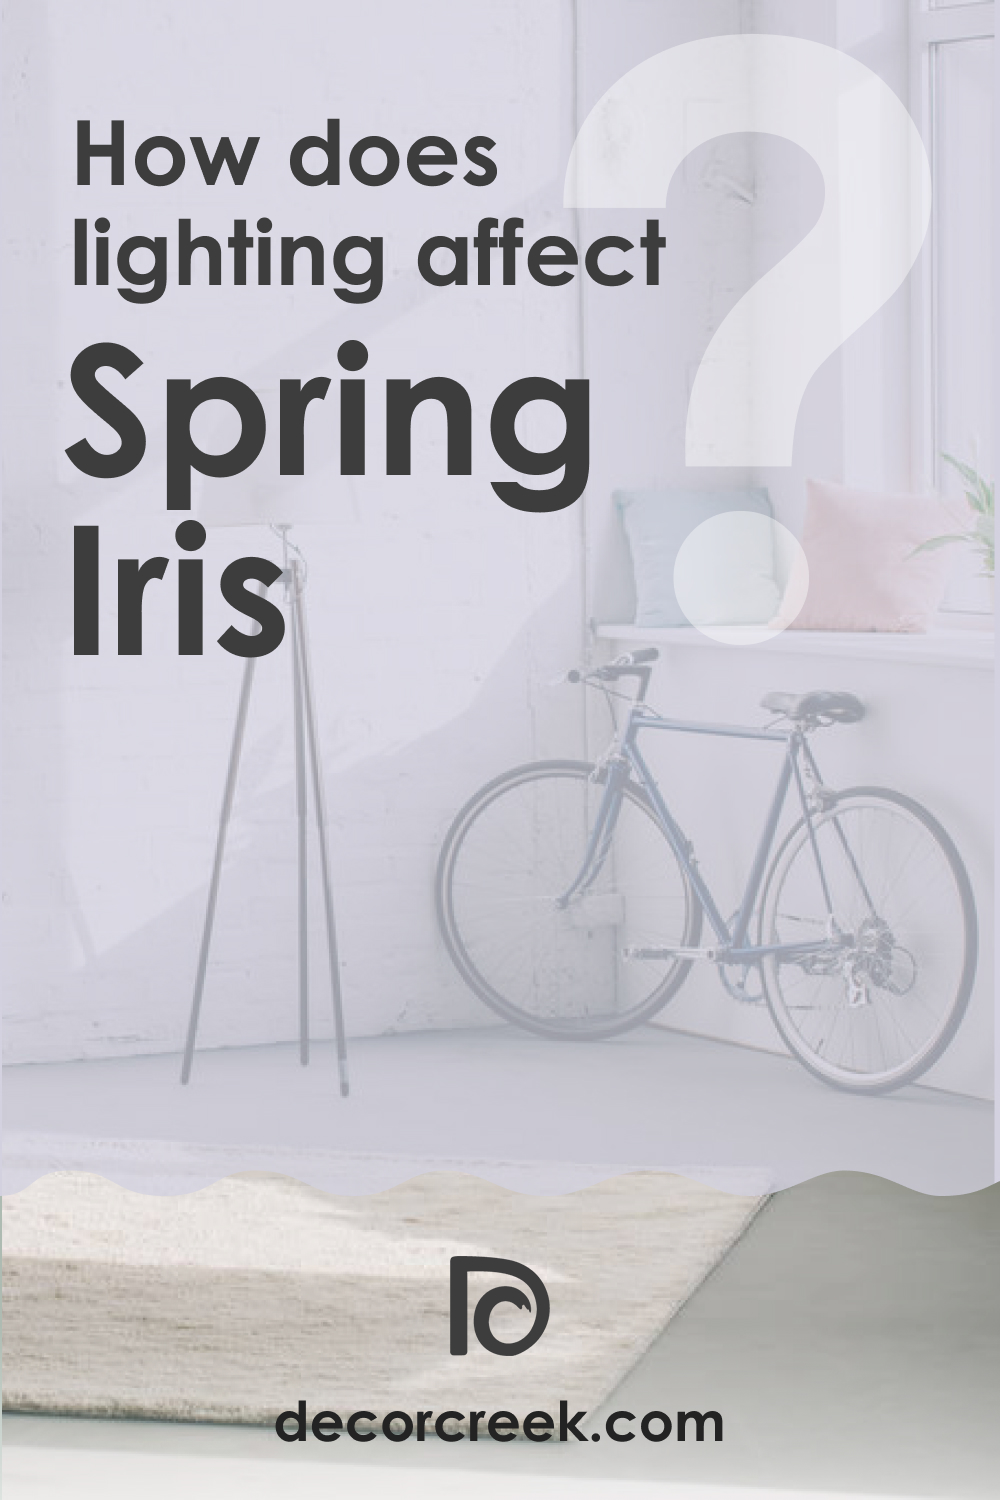 How Does Lighting Affect Spring Iris 1402?